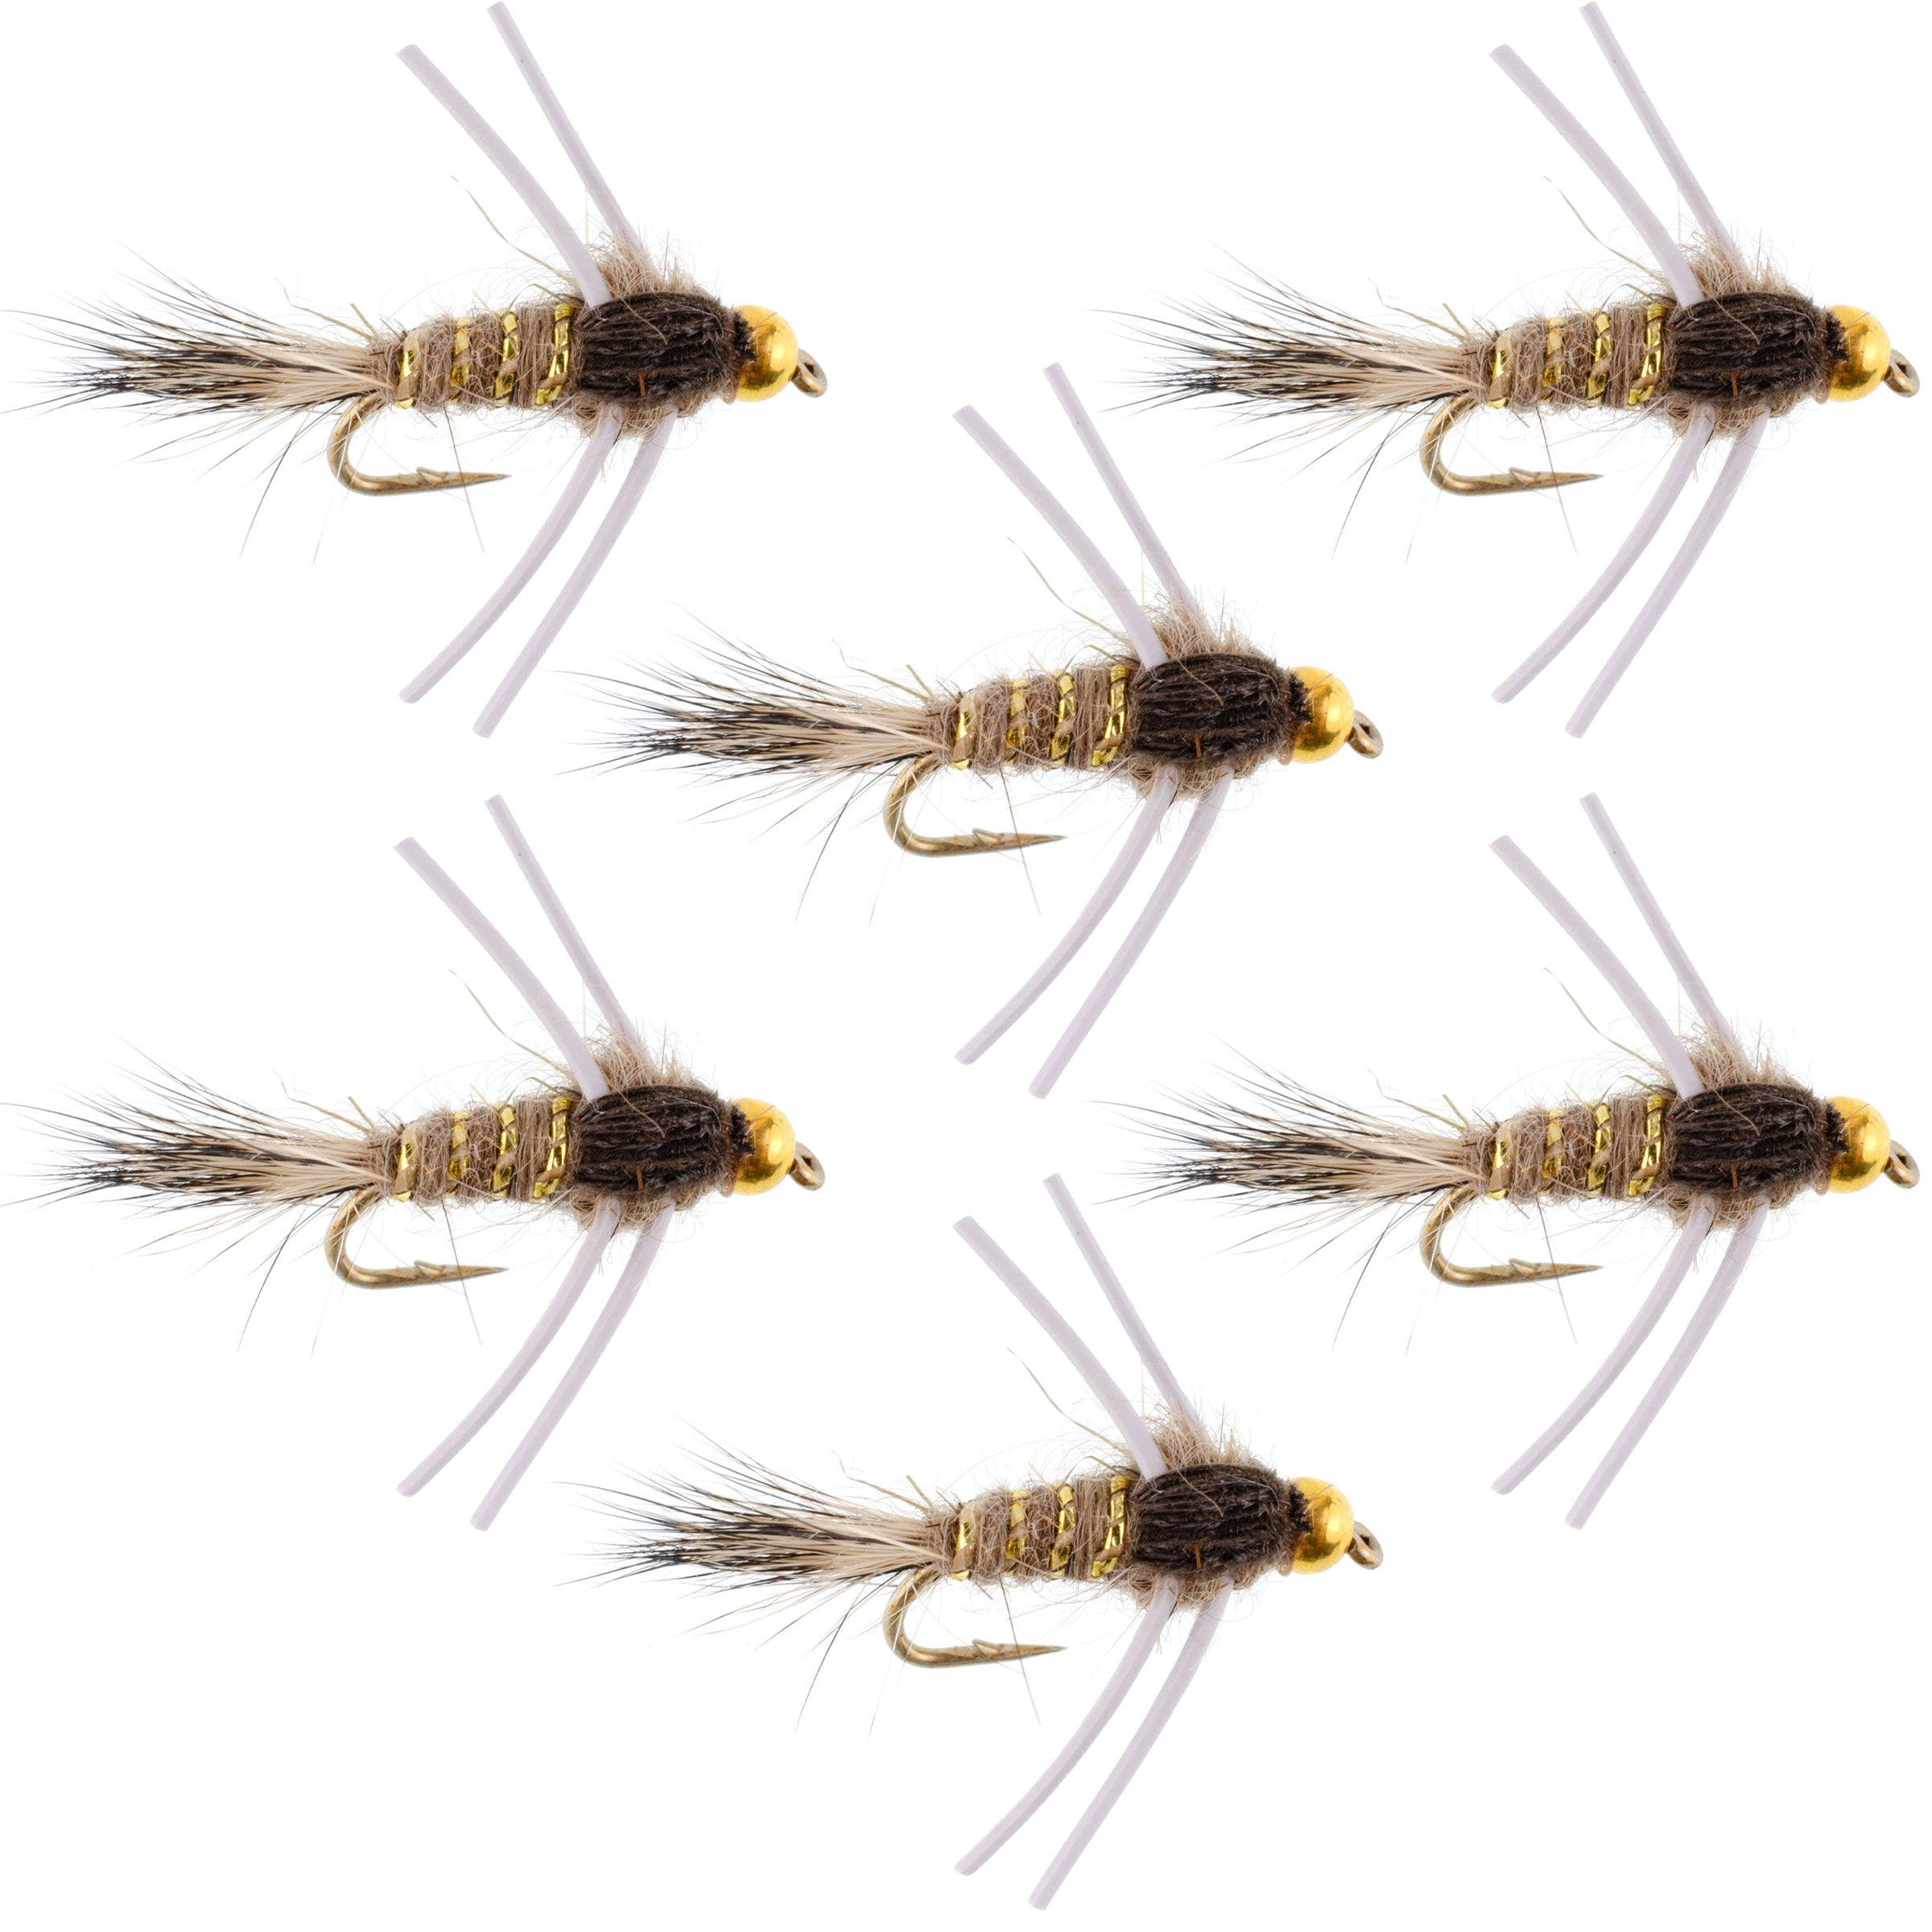 Tungsten Bead Head Rubber Legs Natural Gold-Ribbed Hare's Ear Trout Fly Nymph - 6 Flies Hook Size 12